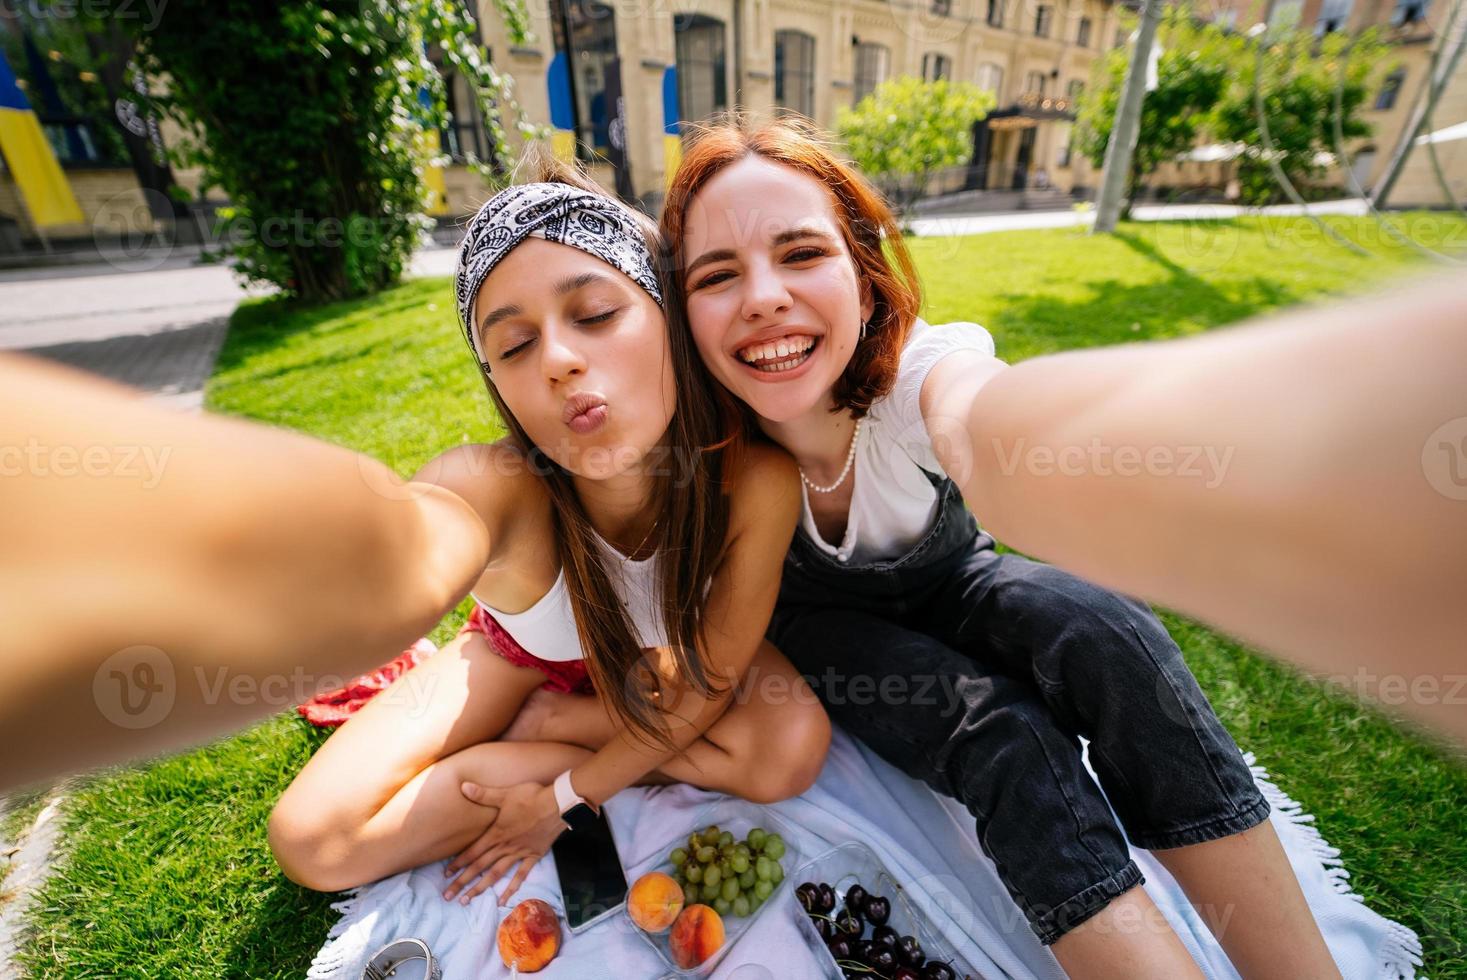 Beautiful women takes a picture with a wonderful park view photo